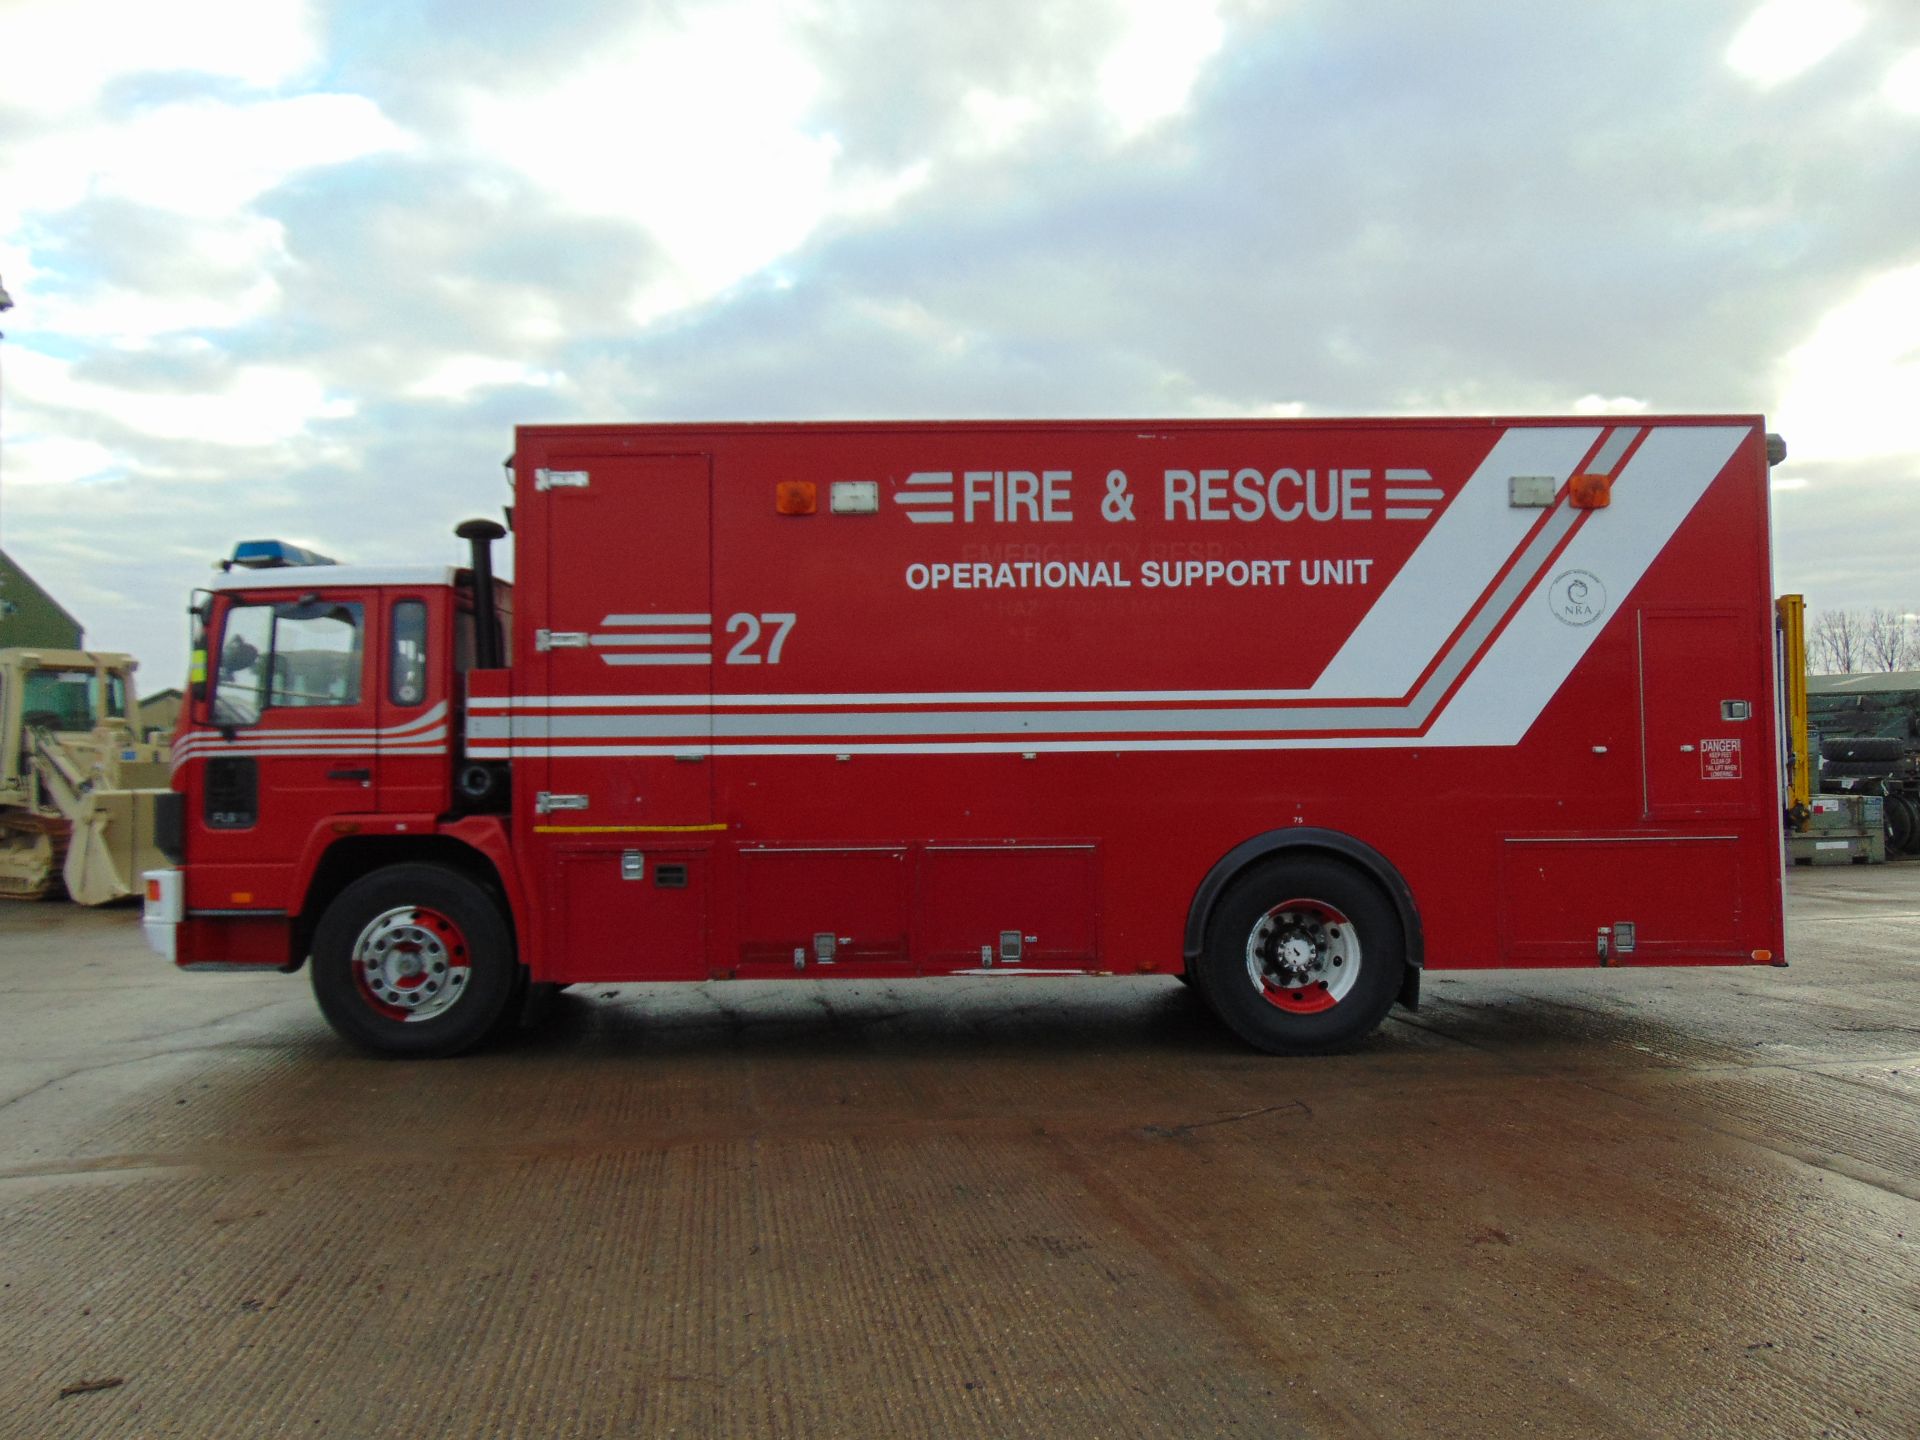 1993 Volvo FL6 18 4 x 2 Incident Response Unit complete with a 1000 Kg Tail Lift - Image 4 of 37